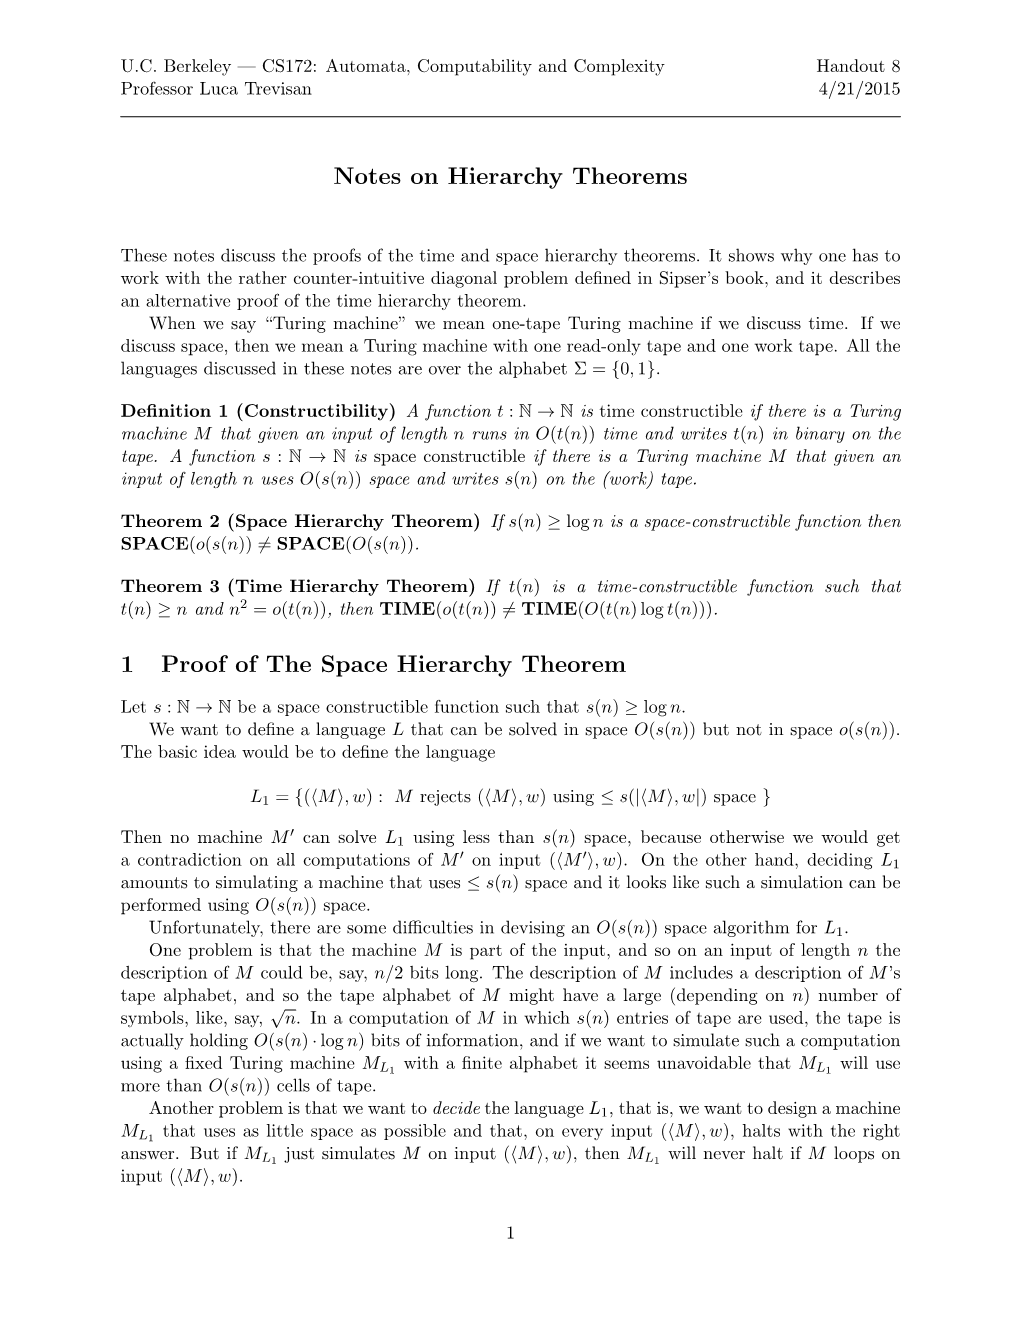 Notes on Hierarchy Theorems 1 Proof of the Space